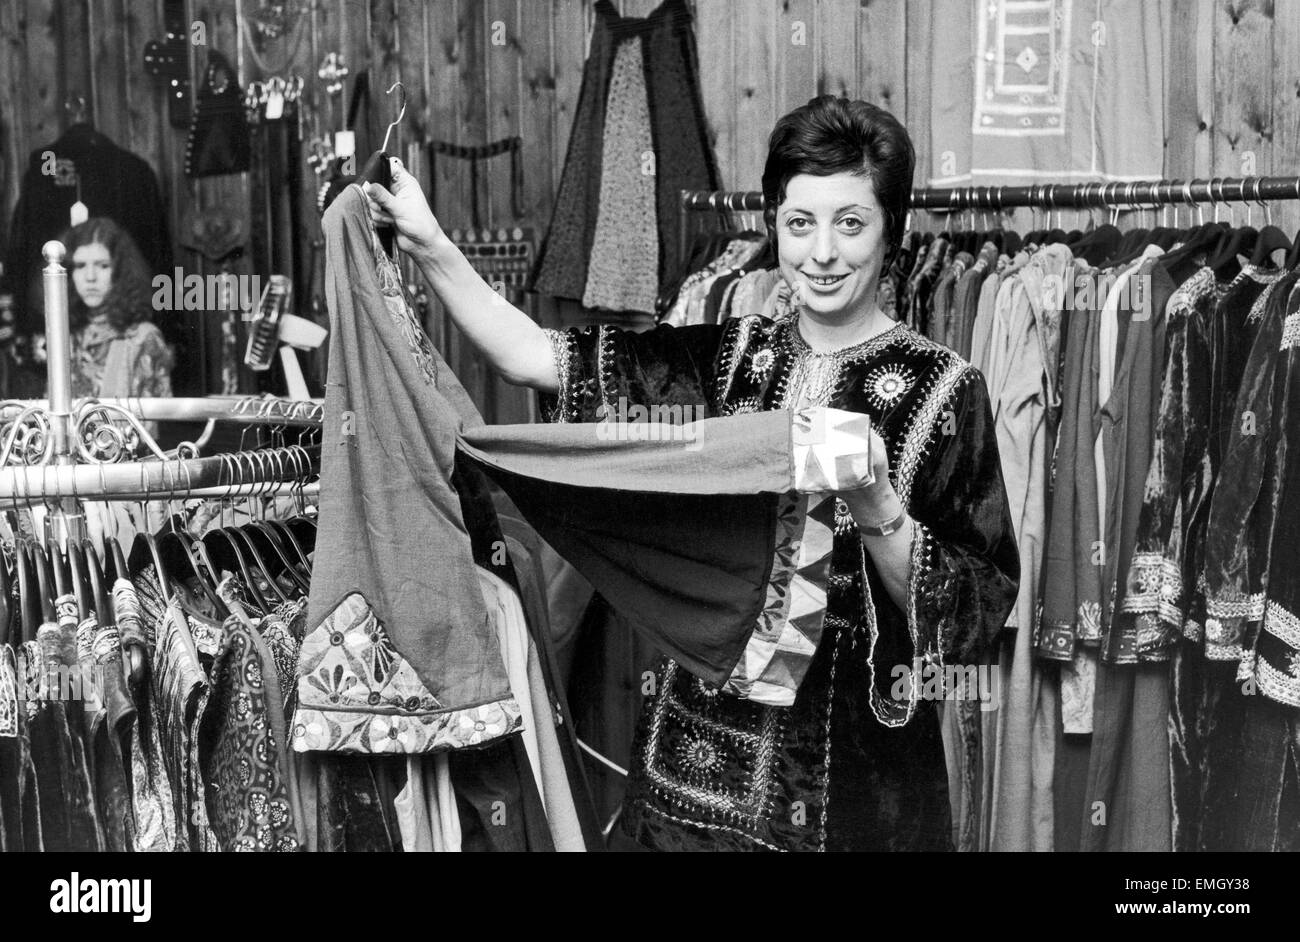 Betty Van Gelder, owner of a dress shop in Hampstead, wearing one of her own velvet shirts which like all the other clothes comes from Hampstead Bazaar. 4th October 1970. Stock Photo